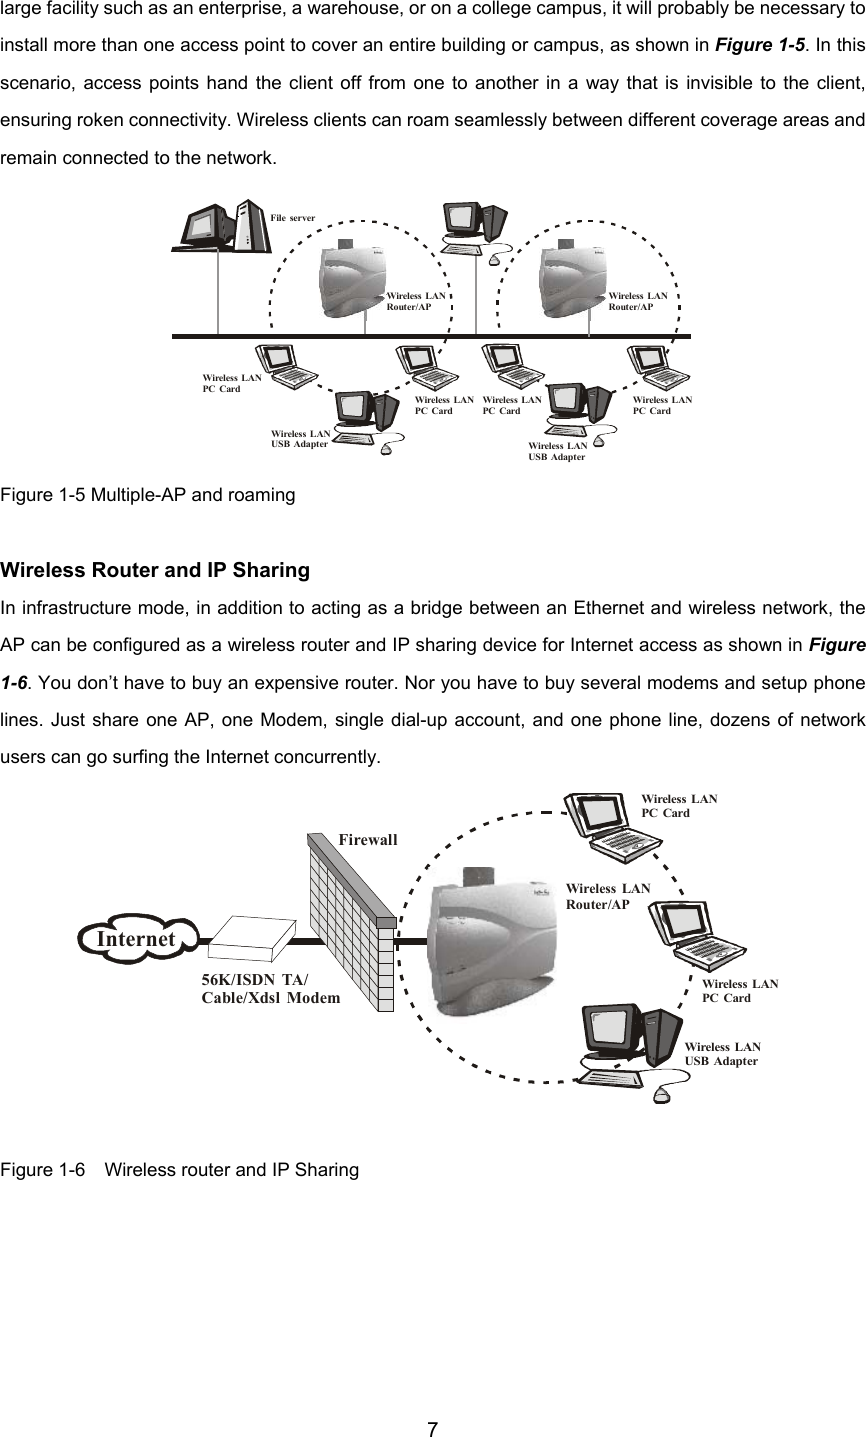        7Wireless LANPC CardWireless LANUSB AdapterWireless LANRouter/AP56K/ISDN TA/Cable/Xdsl ModemFirewallInternetWireless LANPC CardWireless LAN PC CardWireless LANRouter/APFile serverWireless LANRouter/APWireless LAN USB Adapter Wireless LAN USB AdapterWireless LAN PC CardWireless LAN PC CardWireless LAN PC Cardlarge facility such as an enterprise, a warehouse, or on a college campus, it will probably be necessary toinstall more than one access point to cover an entire building or campus, as shown in Figure 1-5. In thisscenario, access points hand the client off from one to another in a way that is invisible to the client,ensuring roken connectivity. Wireless clients can roam seamlessly between different coverage areas andremain connected to the network.         Figure 1-5 Multiple-AP and roaming  Wireless Router and IP Sharing In infrastructure mode, in addition to acting as a bridge between an Ethernet and wireless network, theAP can be configured as a wireless router and IP sharing device for Internet access as shown in Figure1-6. You don’t have to buy an expensive router. Nor you have to buy several modems and setup phonelines. Just share one AP, one Modem, single dial-up account, and one phone line, dozens of networkusers can go surfing the Internet concurrently.           Figure 1-6    Wireless router and IP Sharing      